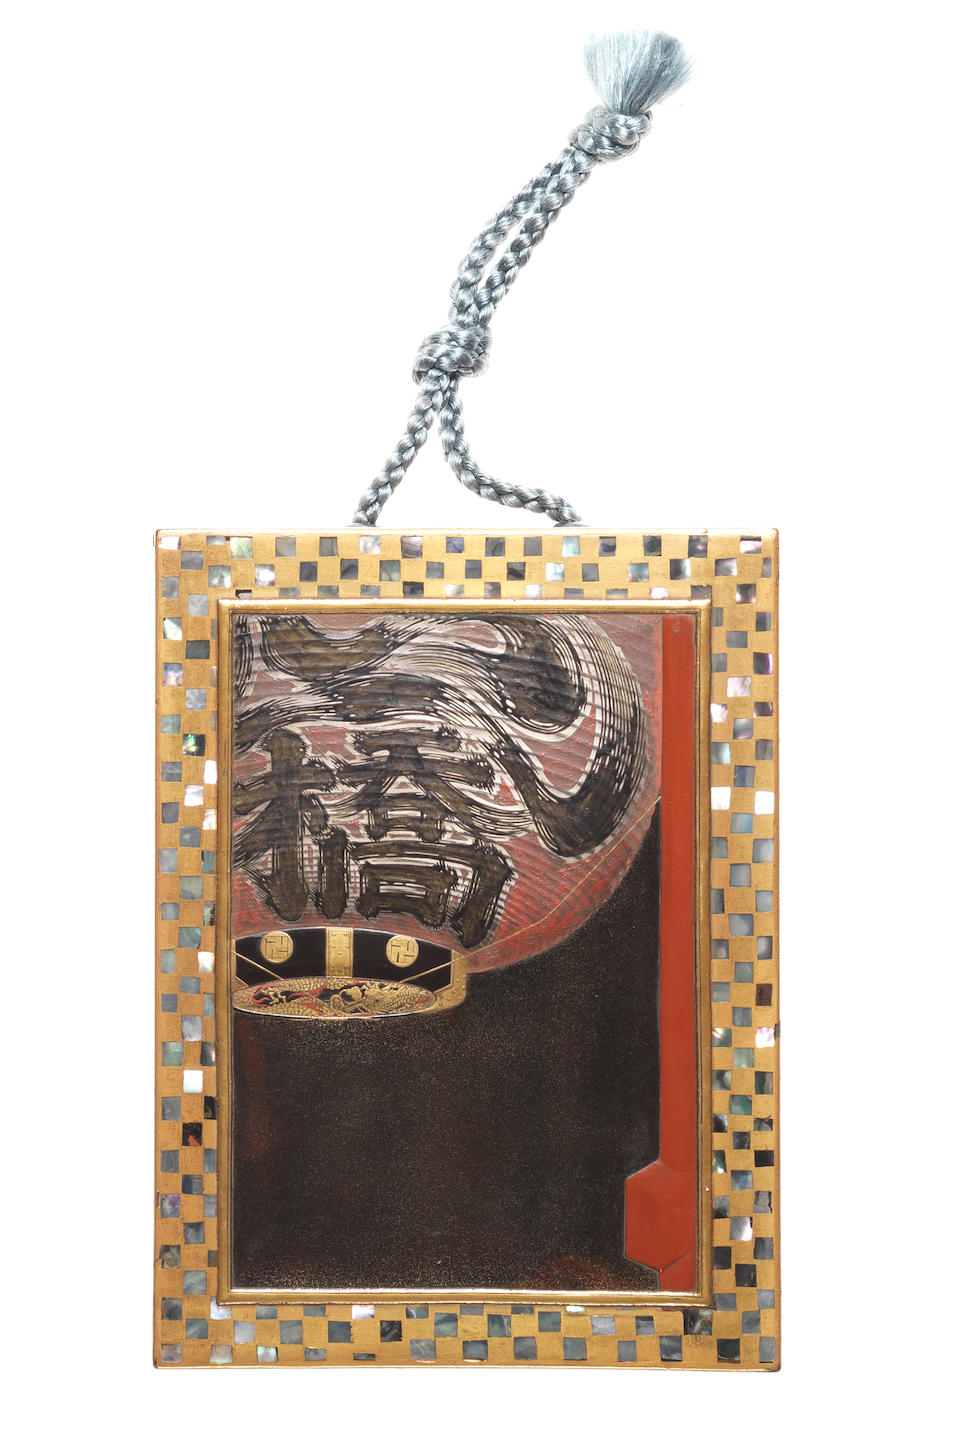 An unusual lacquered square inro By Koma Kansai, 19th century